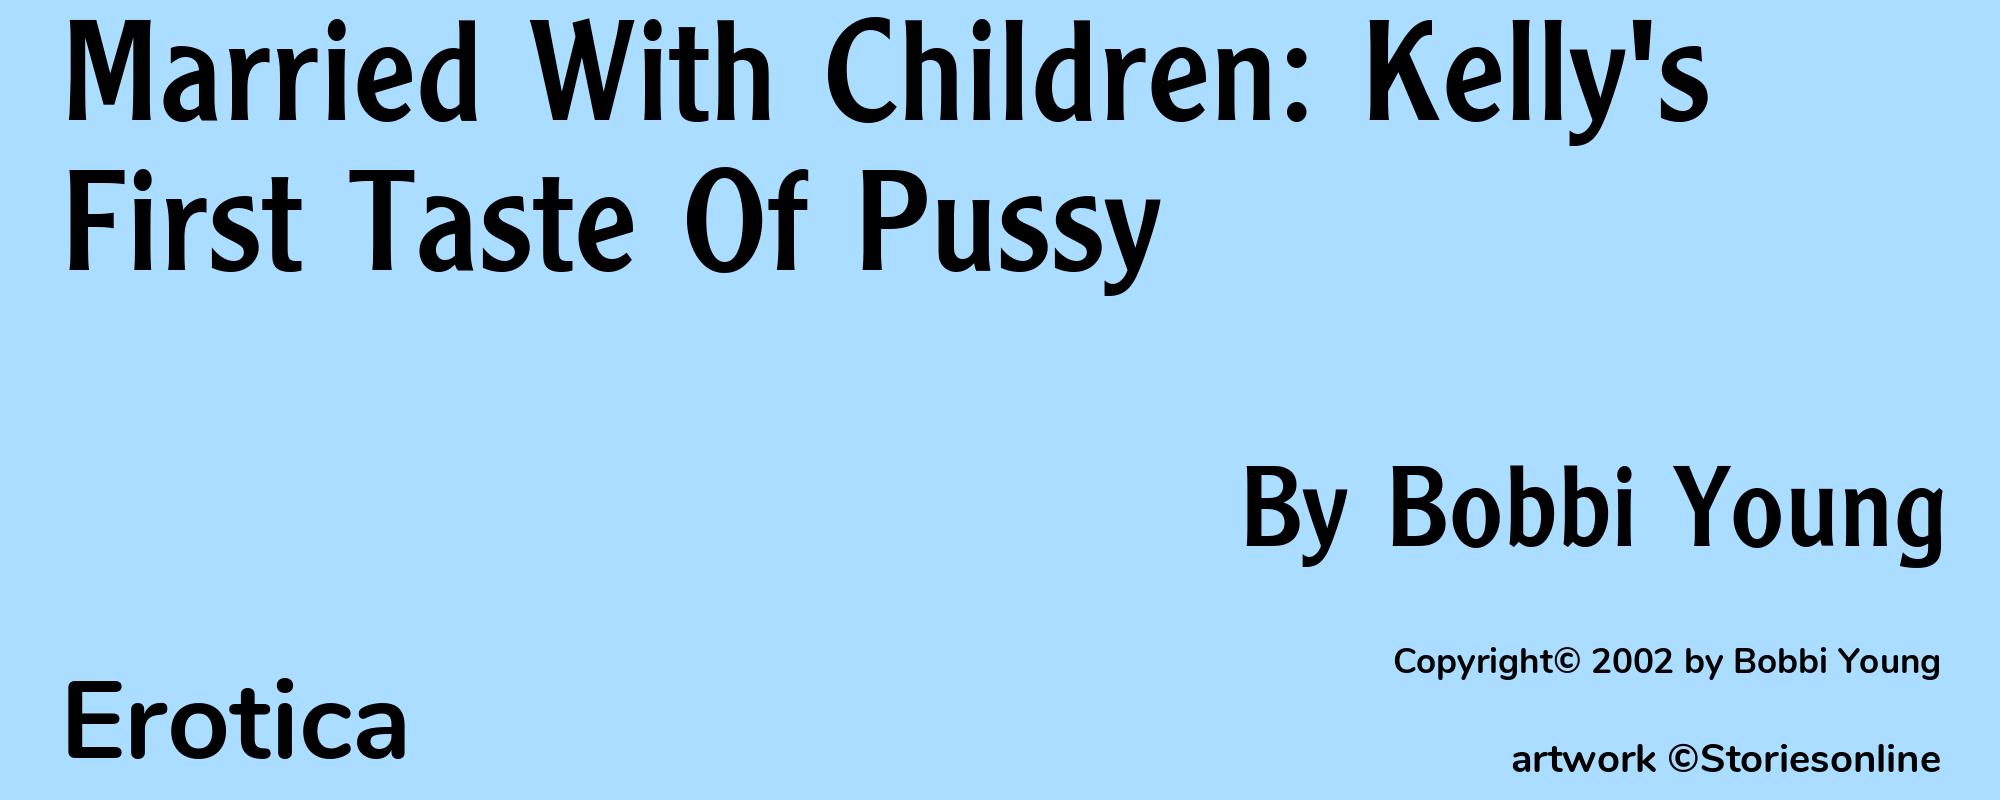 Married With Children: Kelly's First Taste Of Pussy - Cover